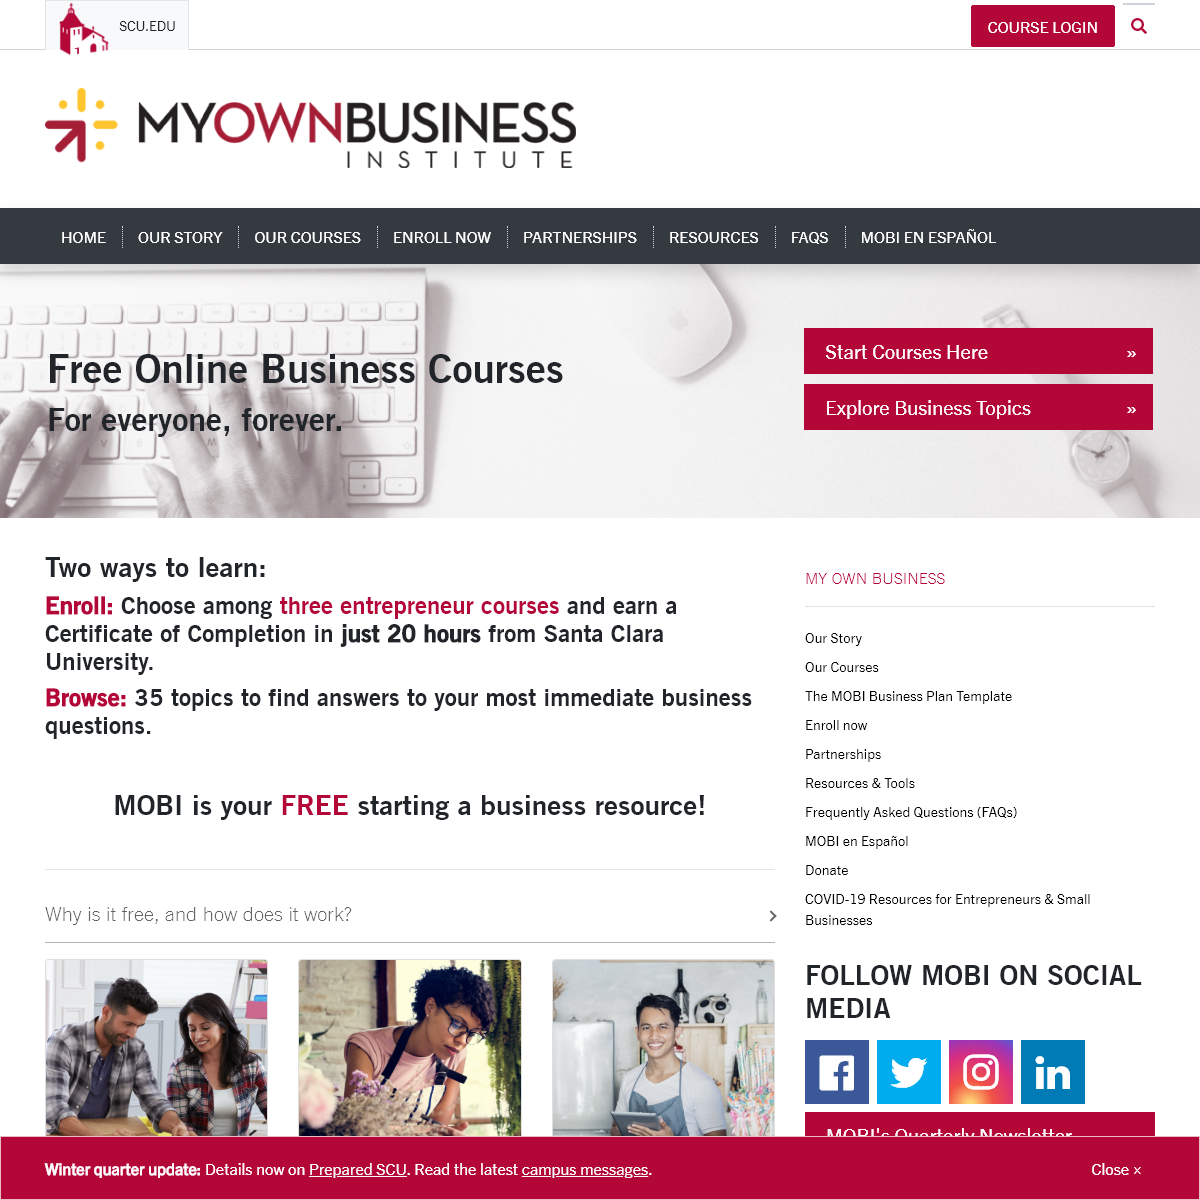 A complete backup of myownbusiness.org